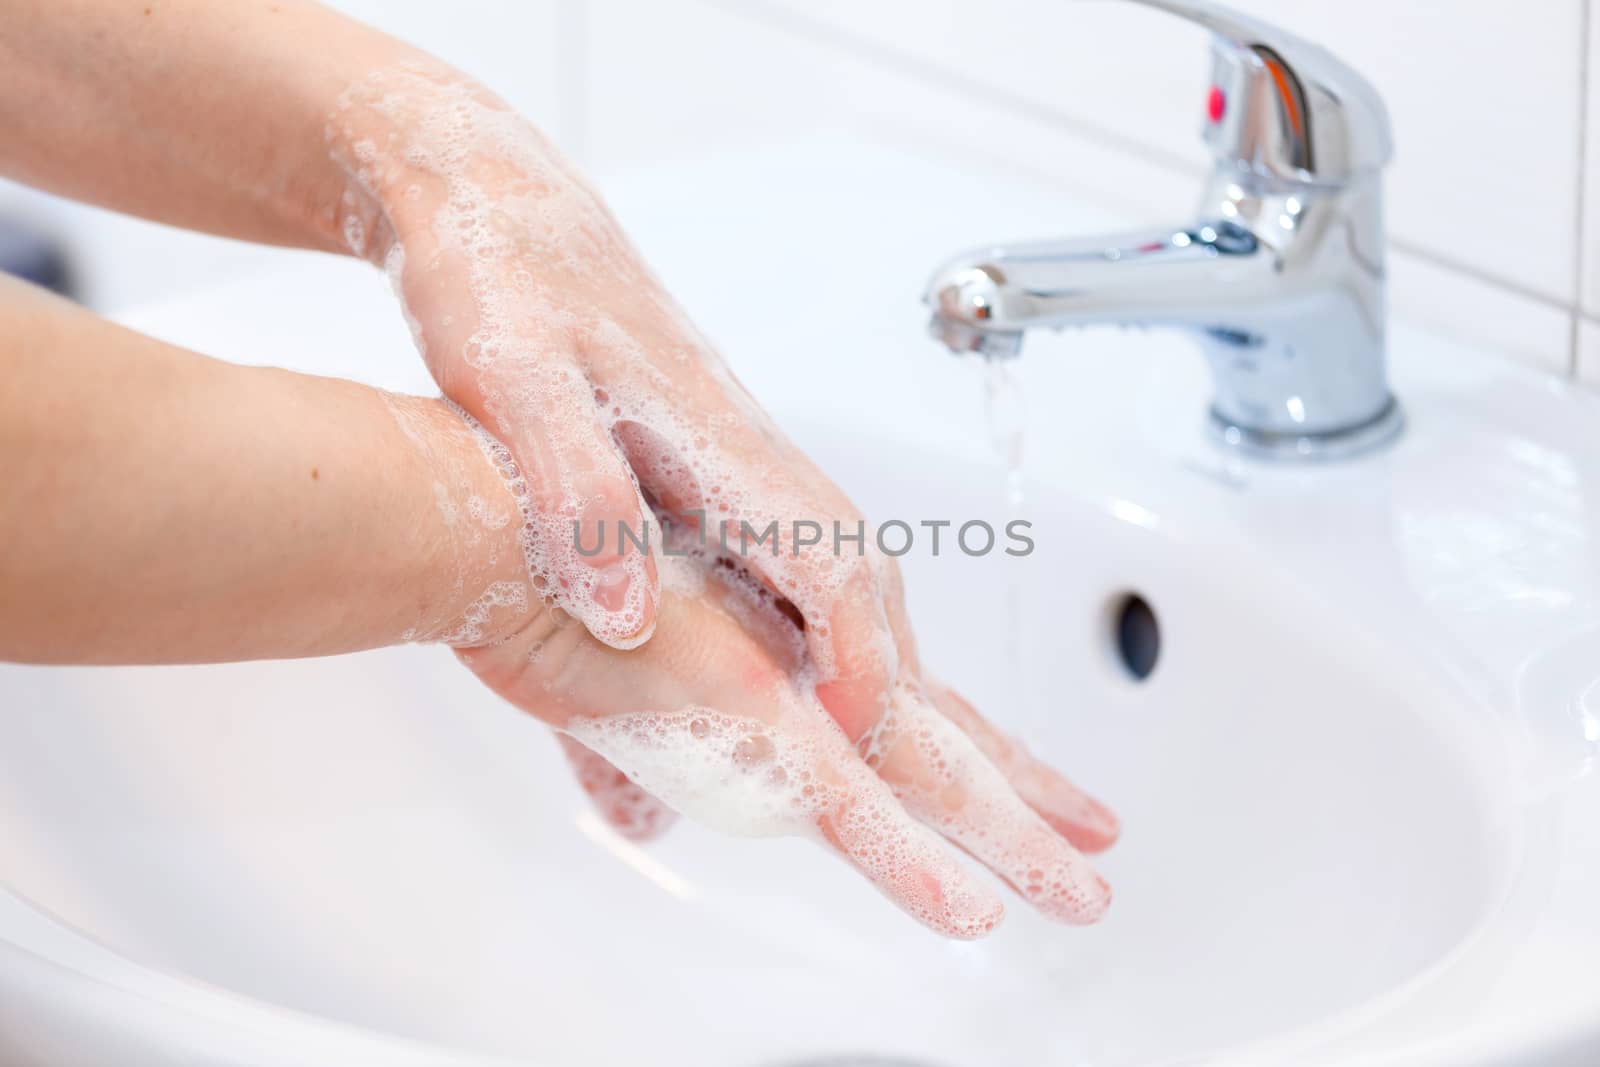 Washing of hands with soap under running water. Hygiene and Cleaning Hands.